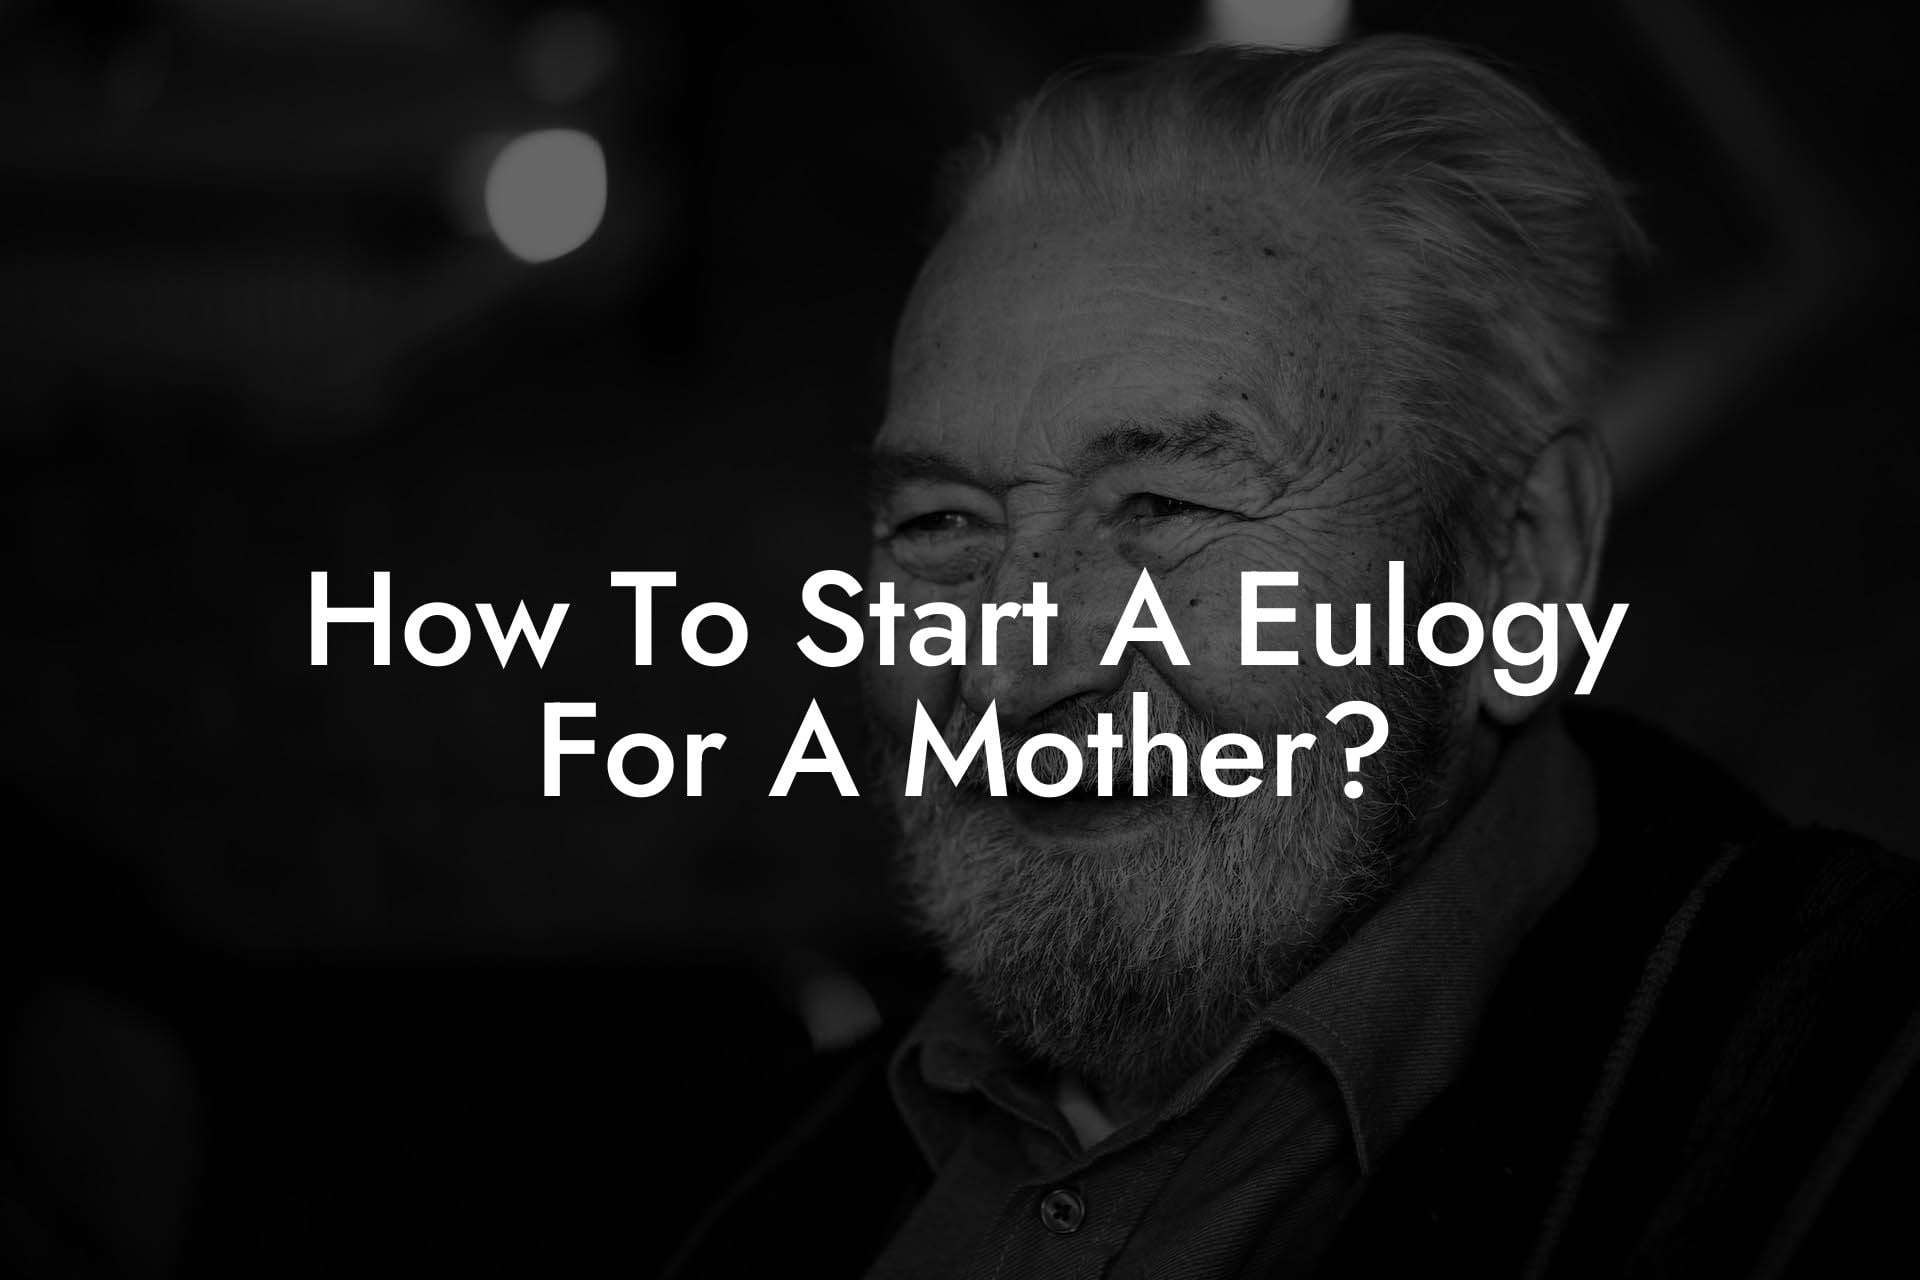 How To Start A Eulogy For A Mother?